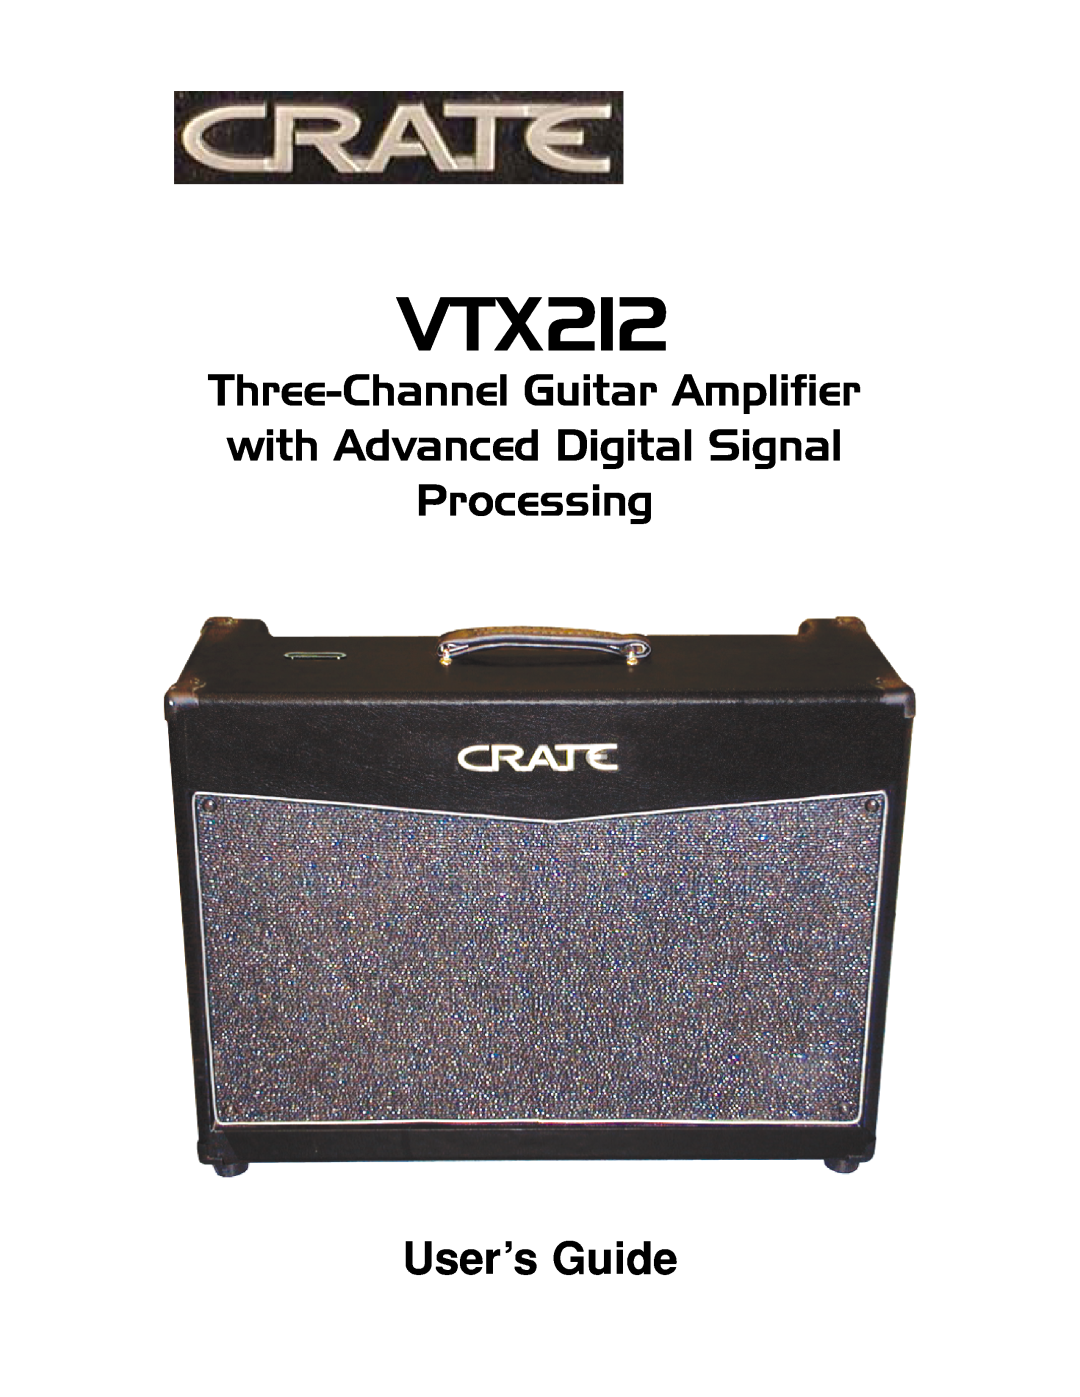 Crate Amplifiers VTX212 manual Three-ChannelGuitar Amplifier, with Advanced Digital Signal Processing, User’s Guide 